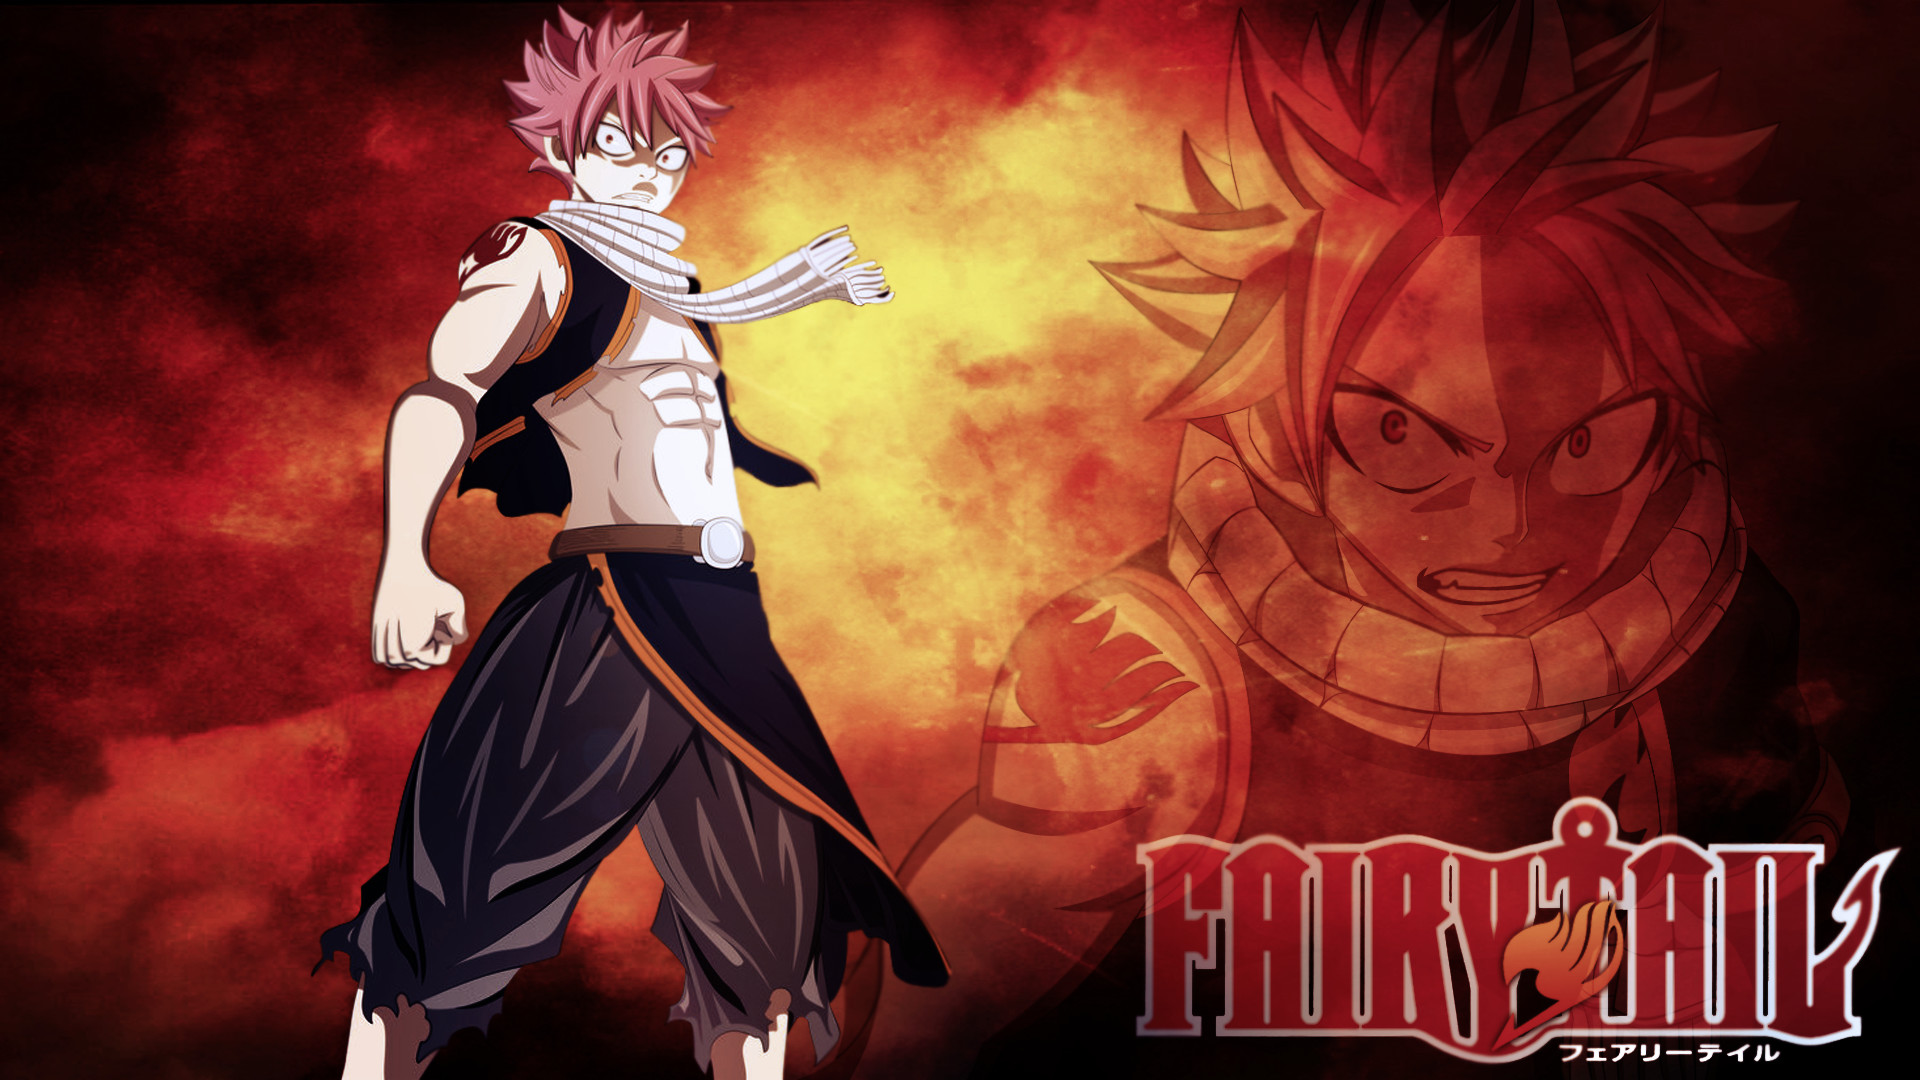 1920x1080 Fairy Tail Wallpaper Background HD #5910 Wallpaper | Cool .